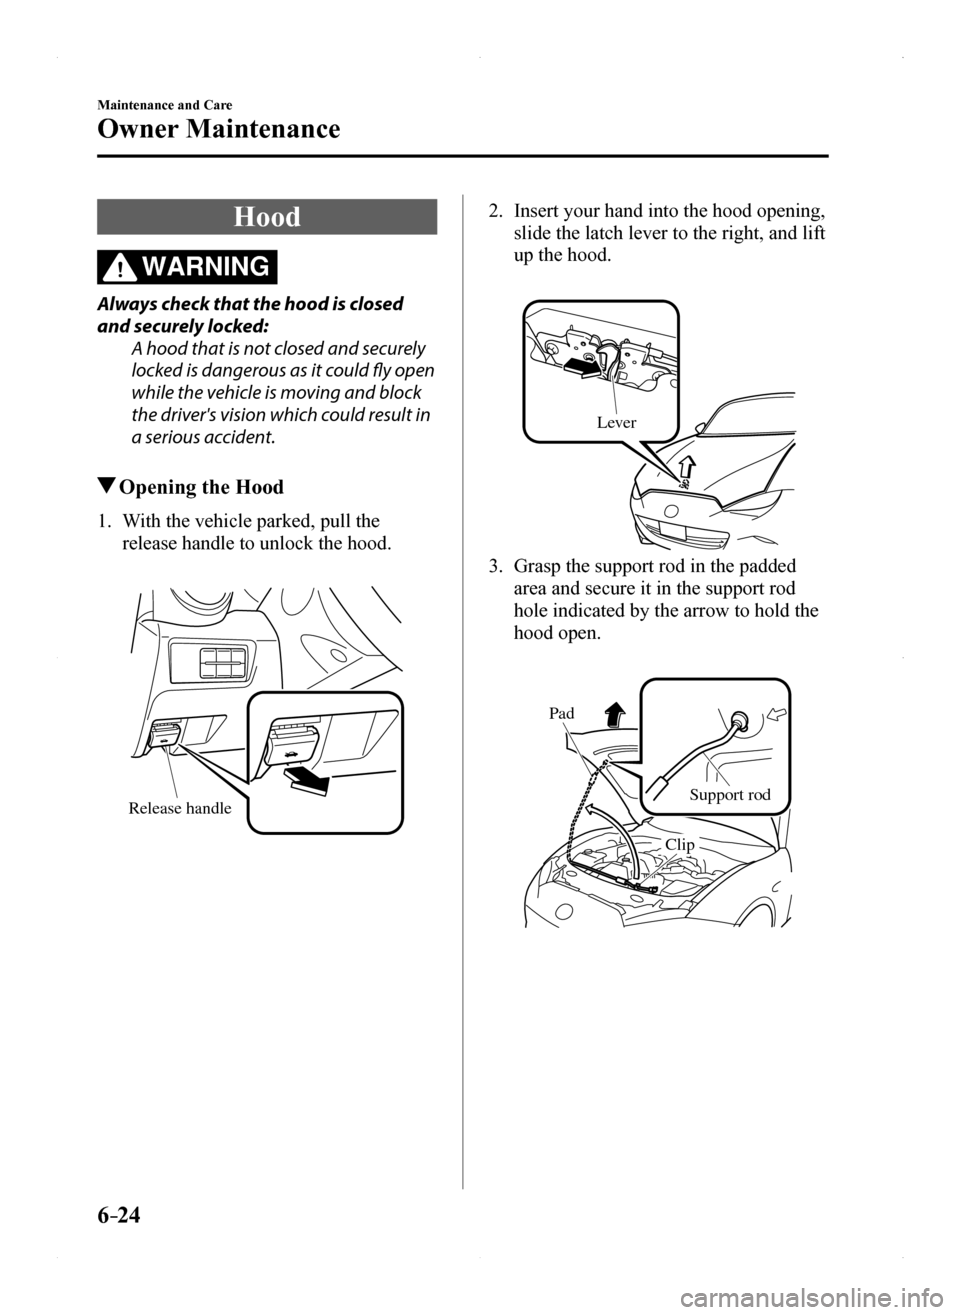 MAZDA MODEL MX-5 2016  Owners Manual (in English) 6–24
Maintenance and Care
Owner Maintenance
Hood
WARNING
Always check that the hood is closed 
and securely locked:
A hood that is not closed and securely 
locked is dangerous as it could fly open 
